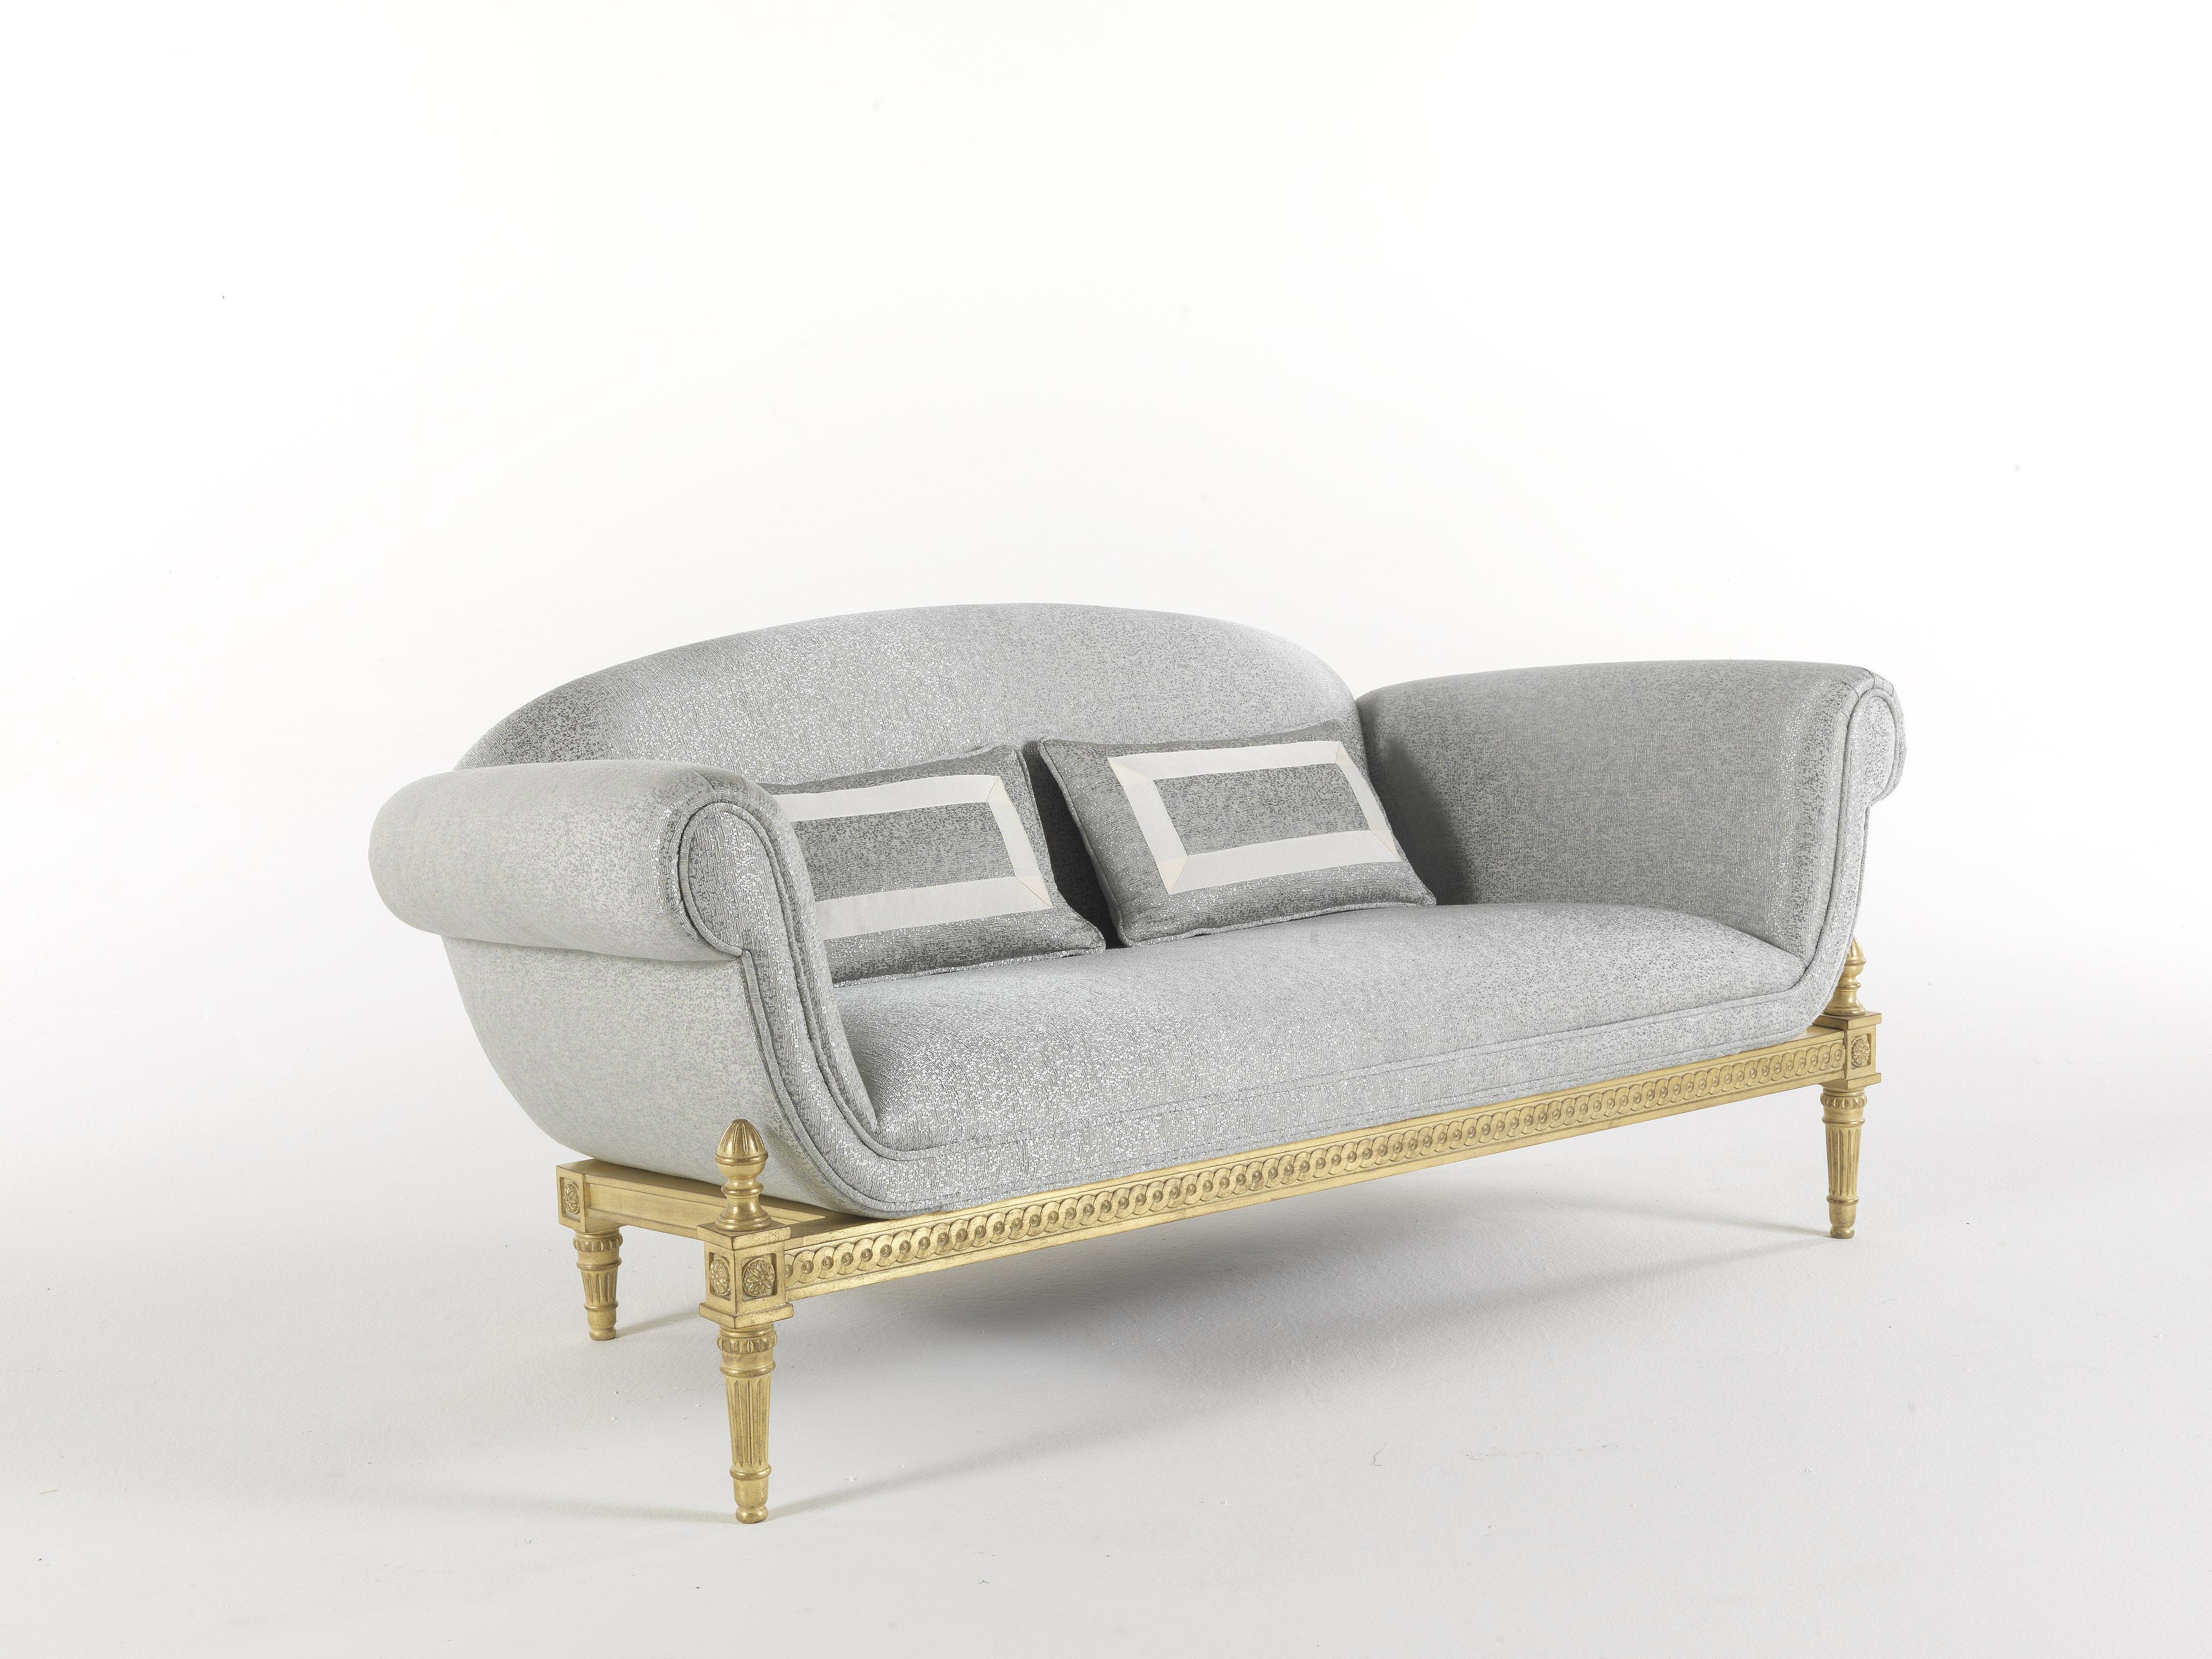 A stunning combination of classic and contemporary, Enigma furniture pieces best represent Jumbo Collection’s New Era concept, a new vision of classic style where tradition and experimentation create something new. Upholstered in cotton velvet, they